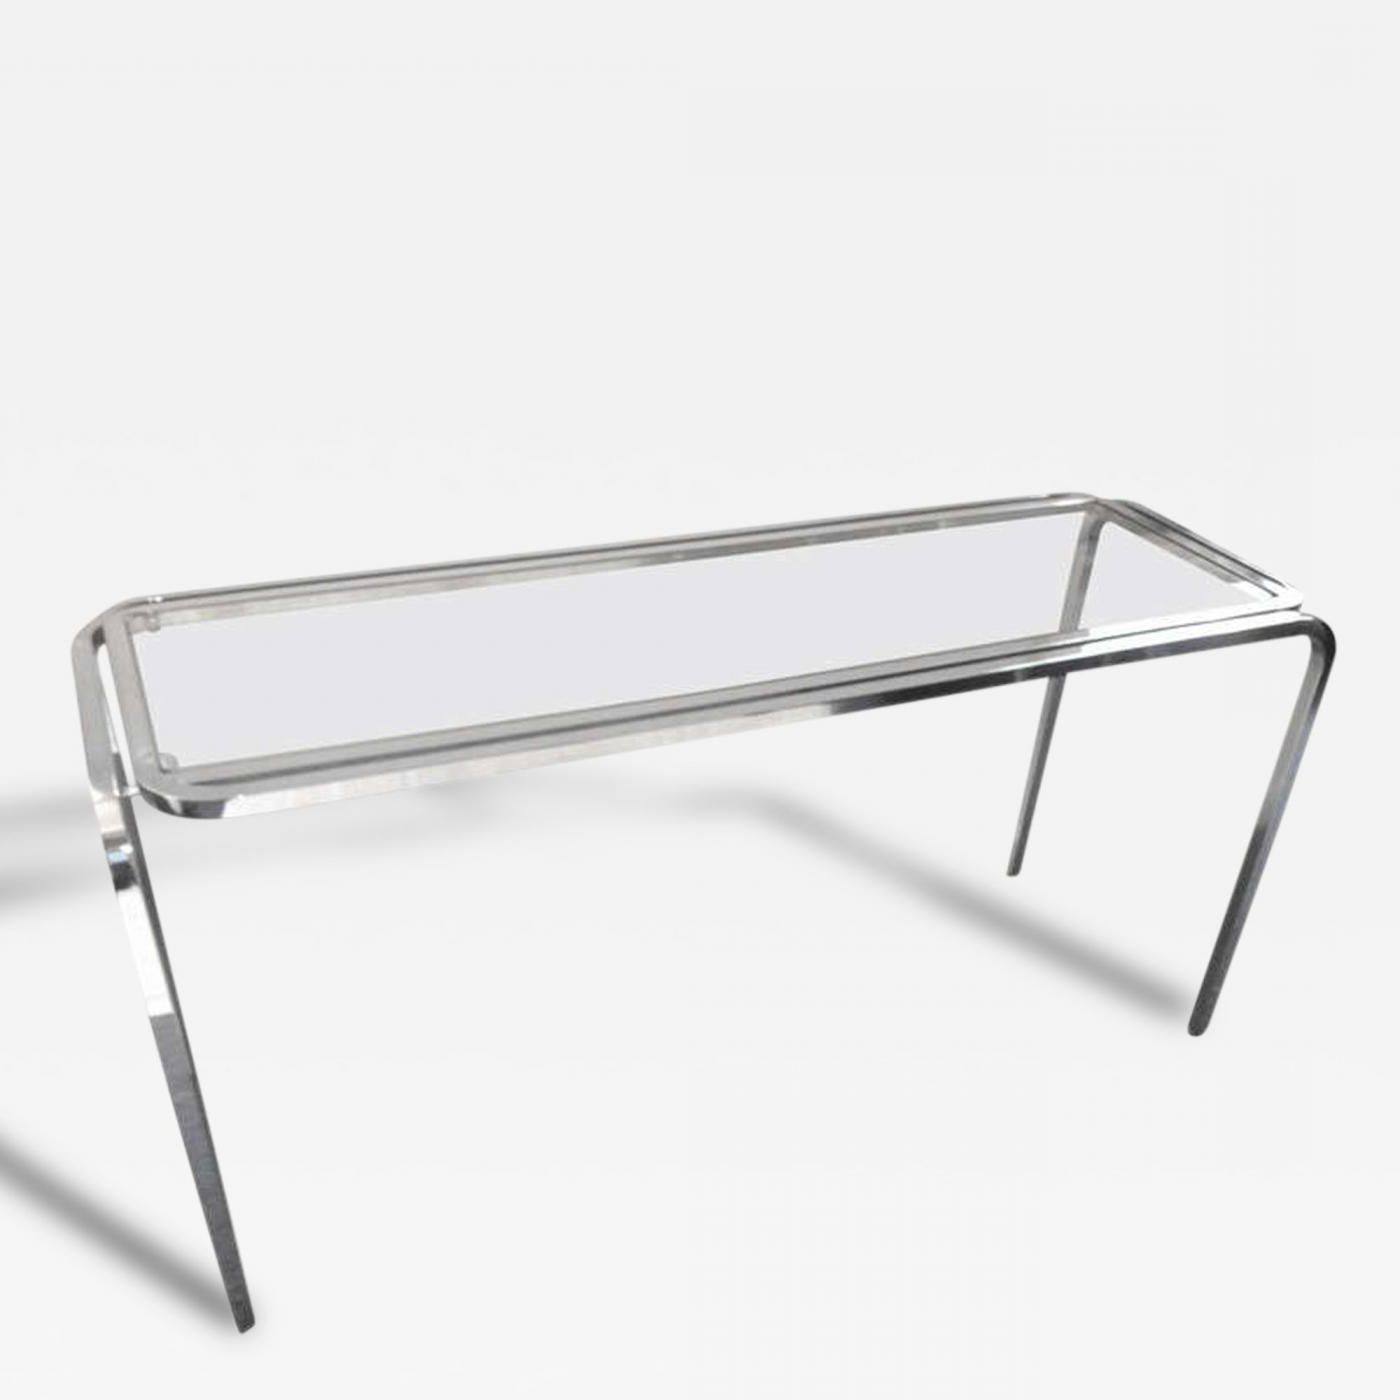 1970's Polished Chrome Glass Sofa Table Inside Most Recent Polished Chrome Round Console Tables (View 10 of 10)